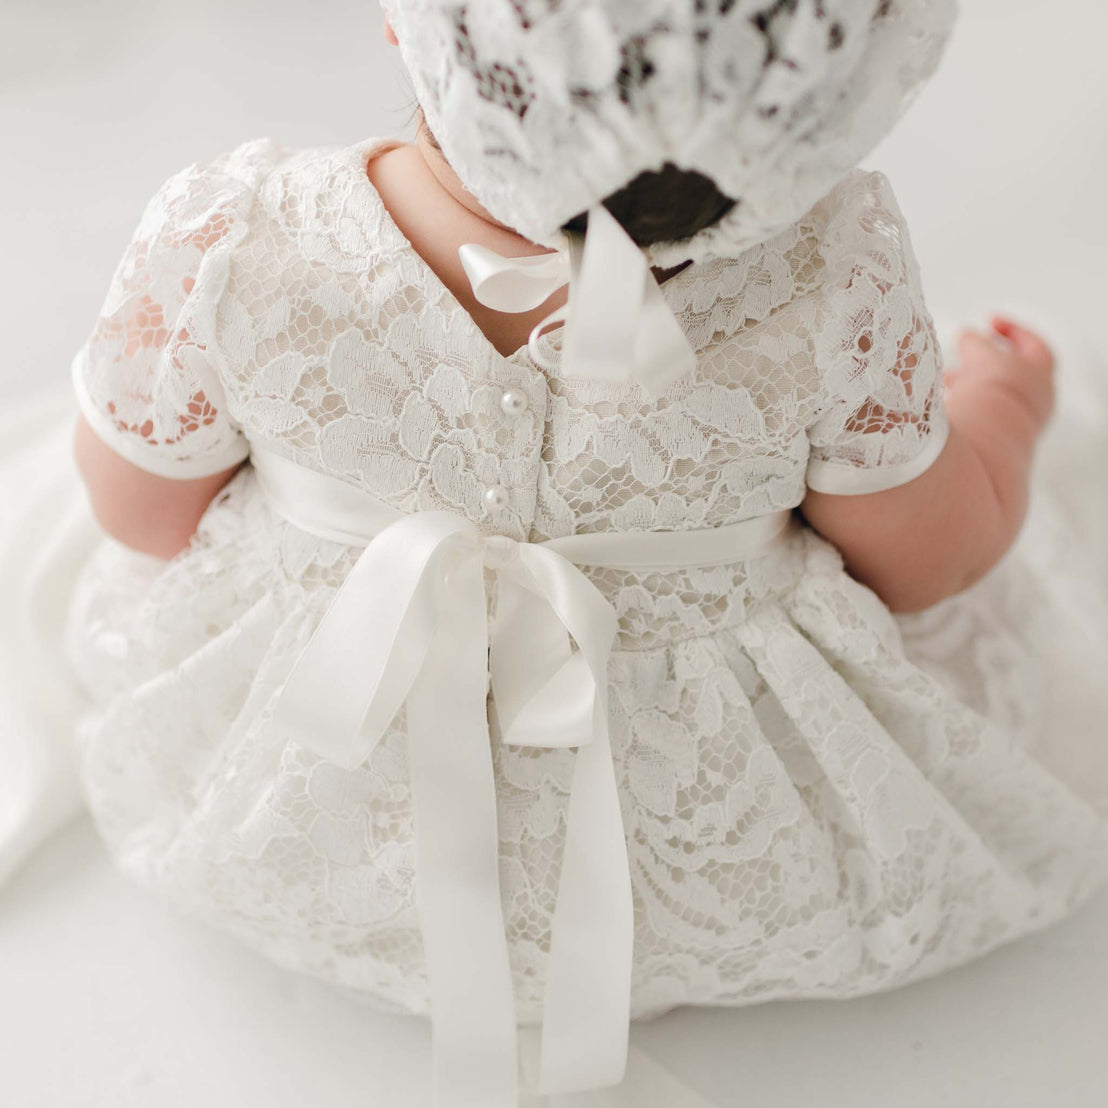 A baby dressed in a Rose Christening Gown & Bonnet, seen from behind. The dress is detailed with a silk ribbon at the back. The setting is a bright room with a soft ambiance.